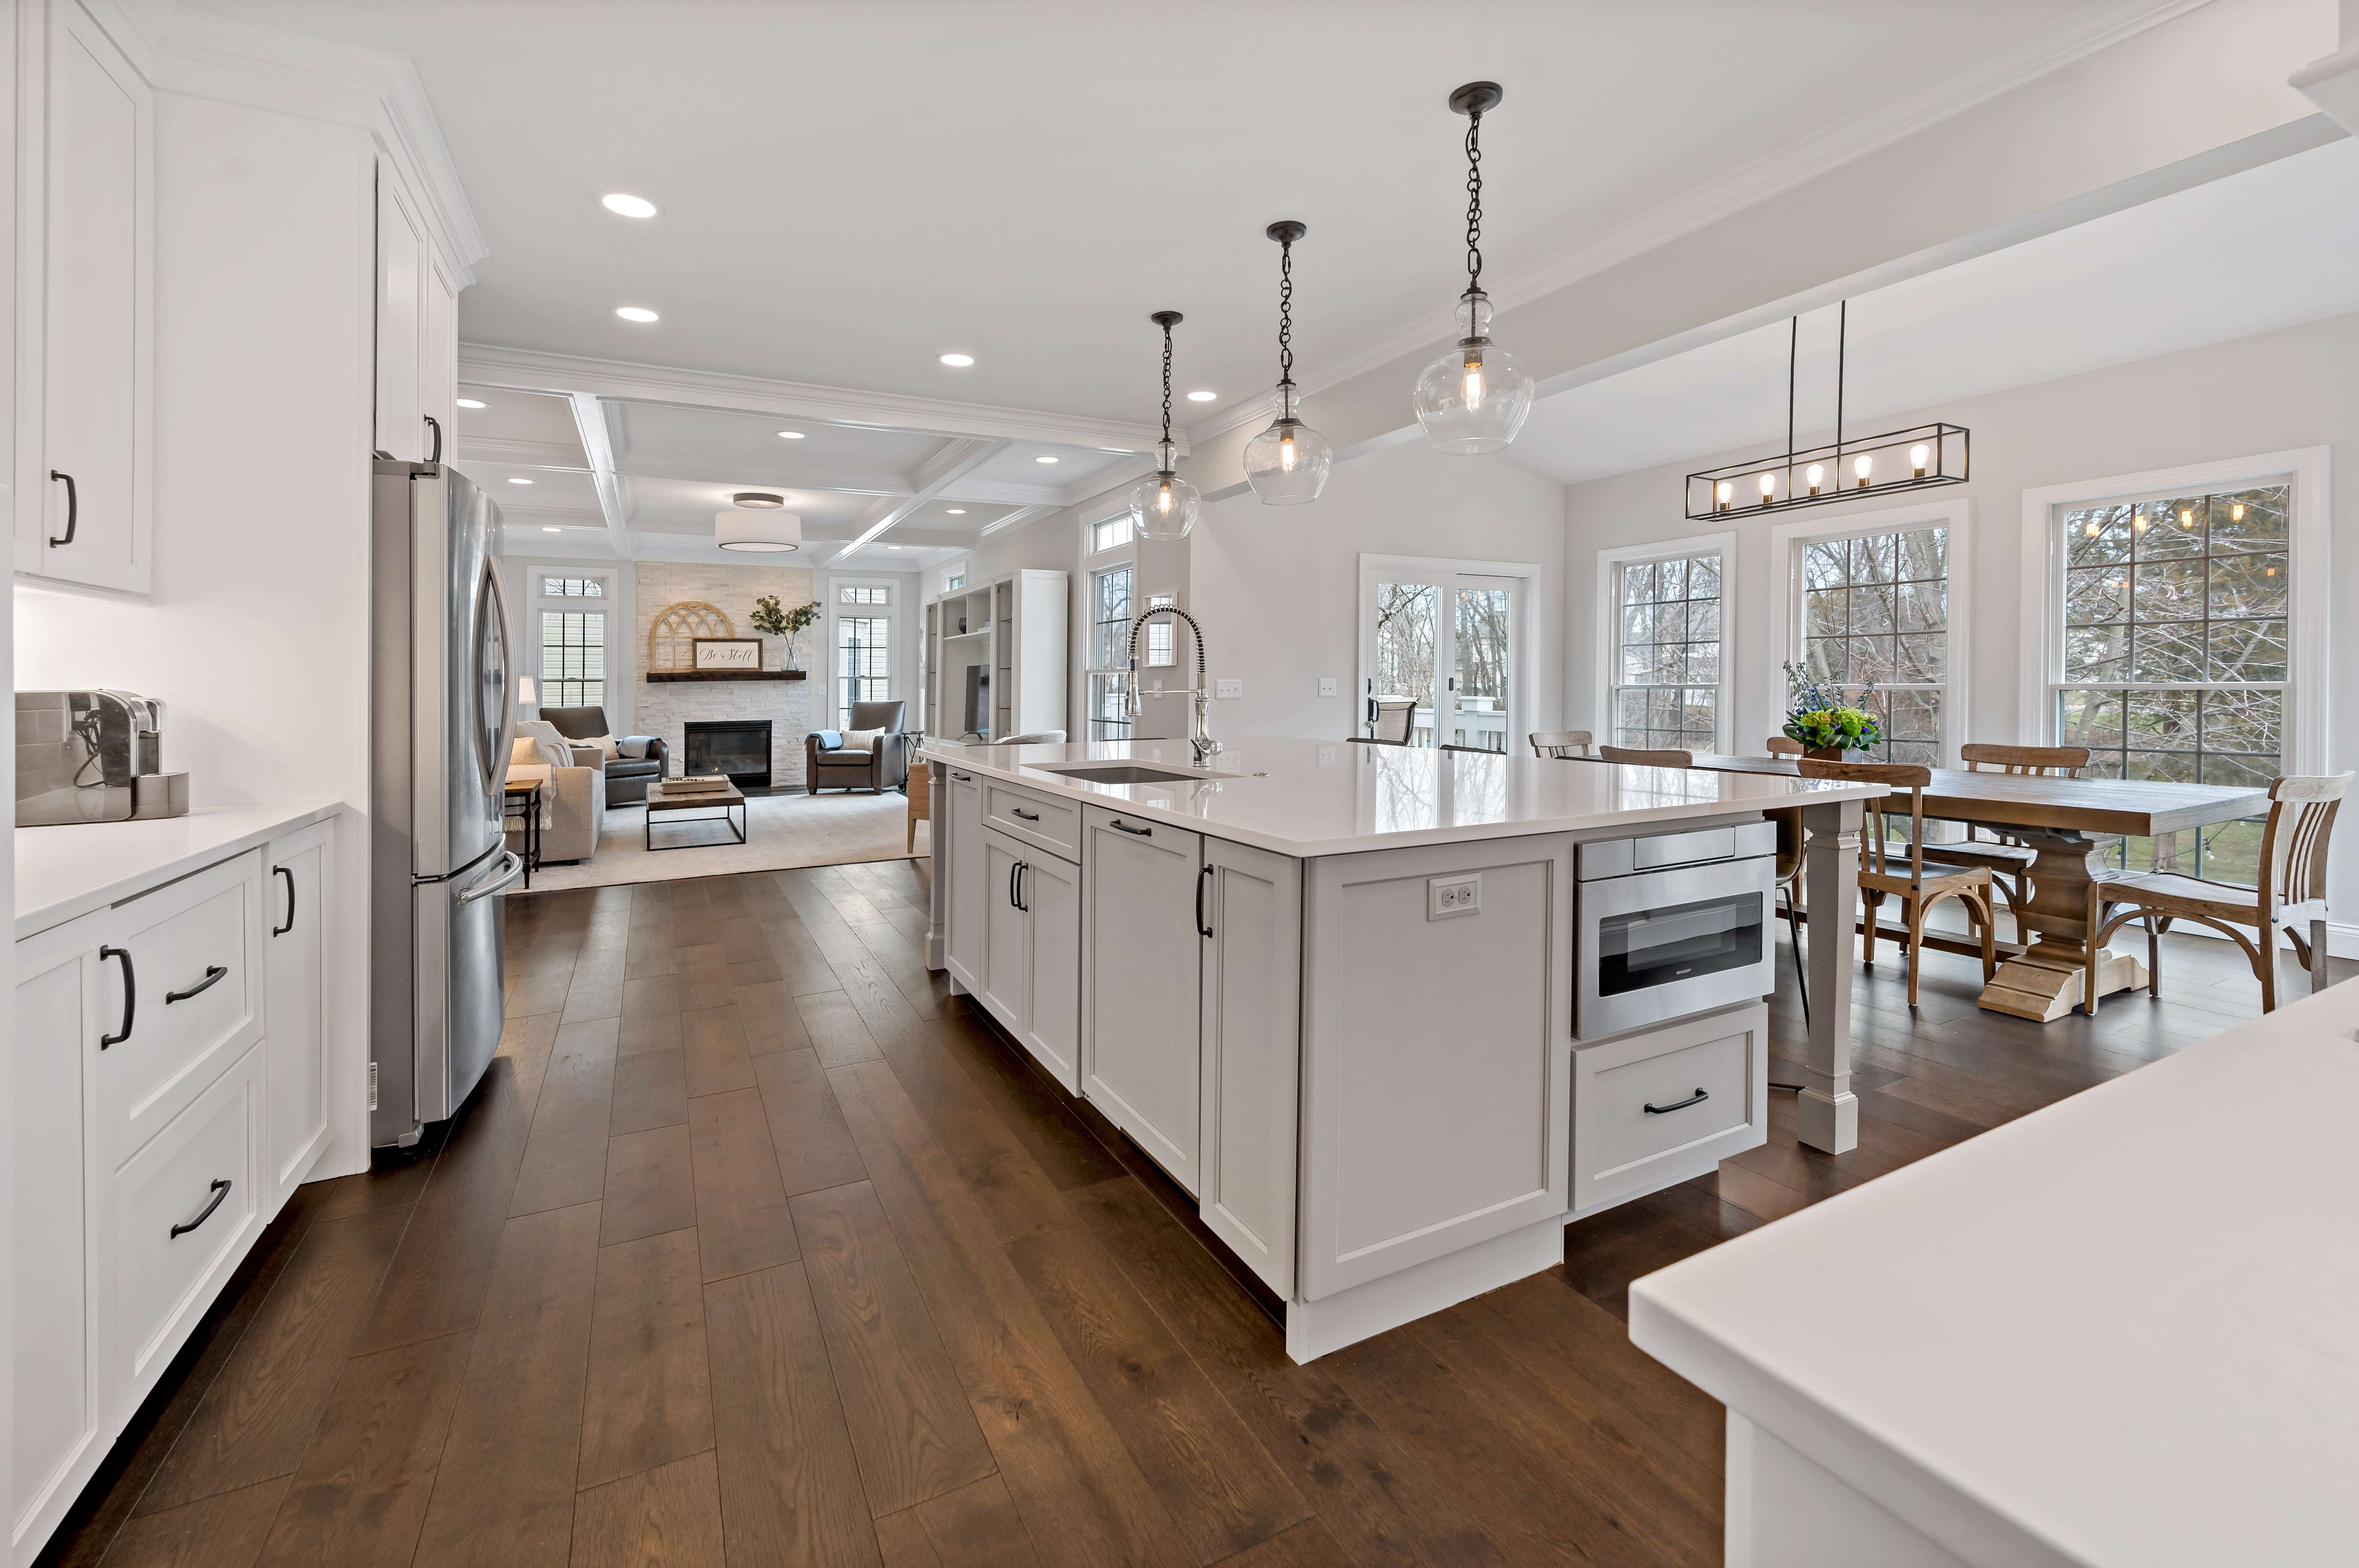 White cabinets and kitchen island